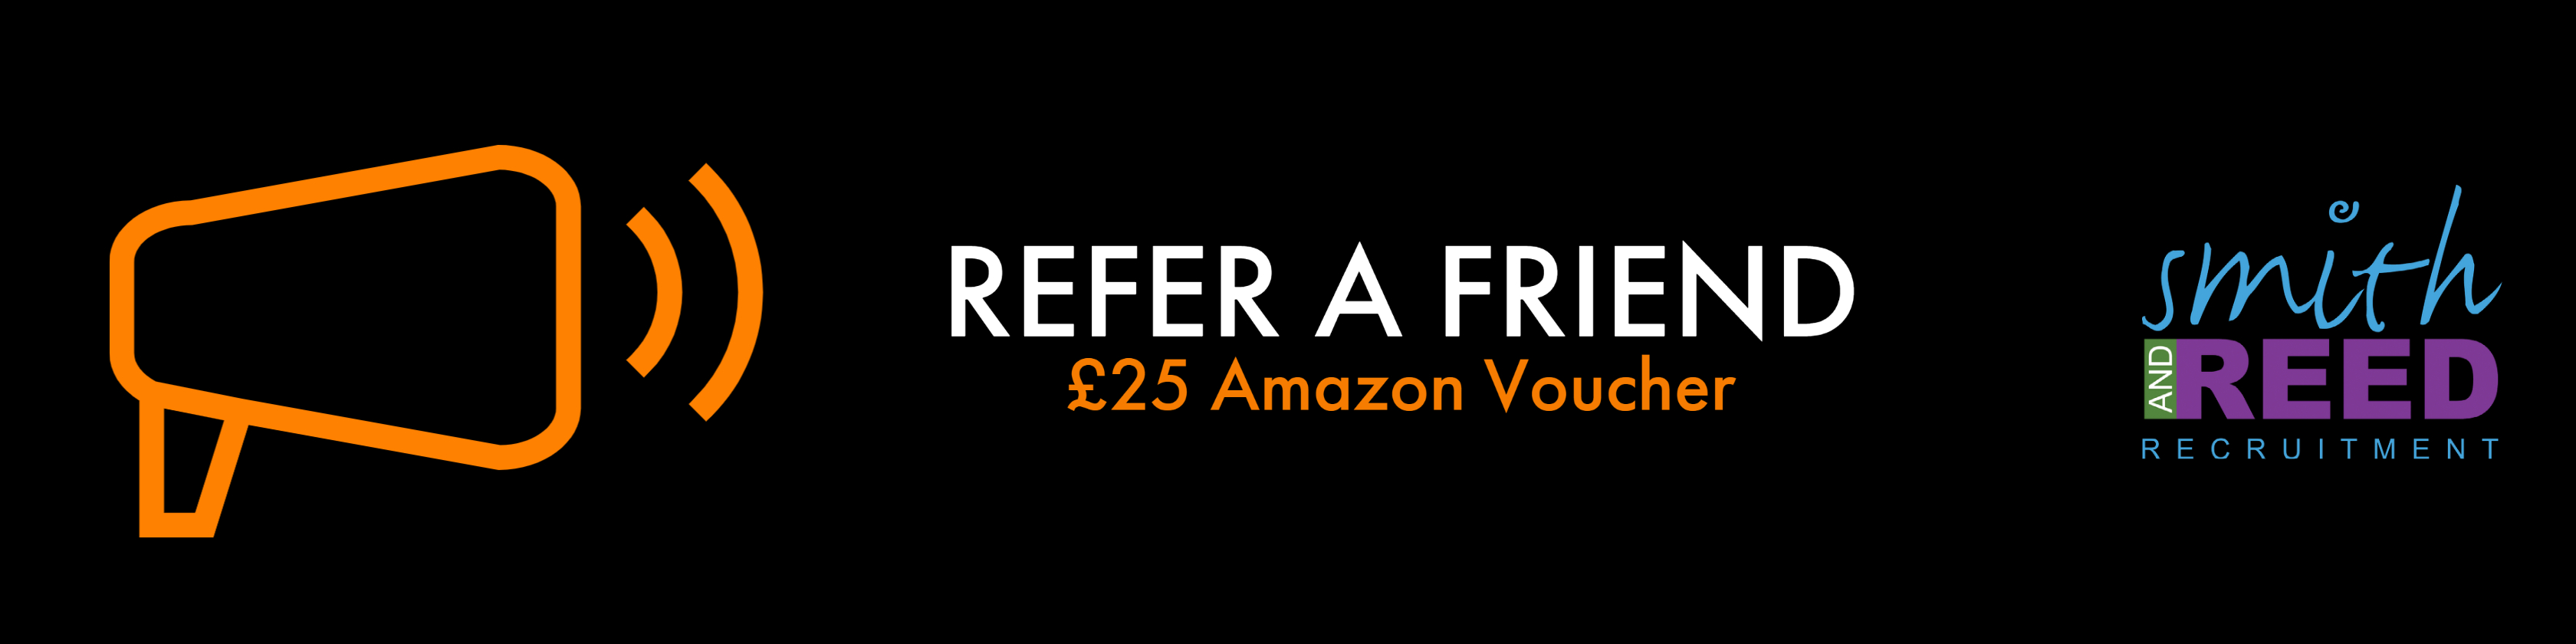 refer a friend competition